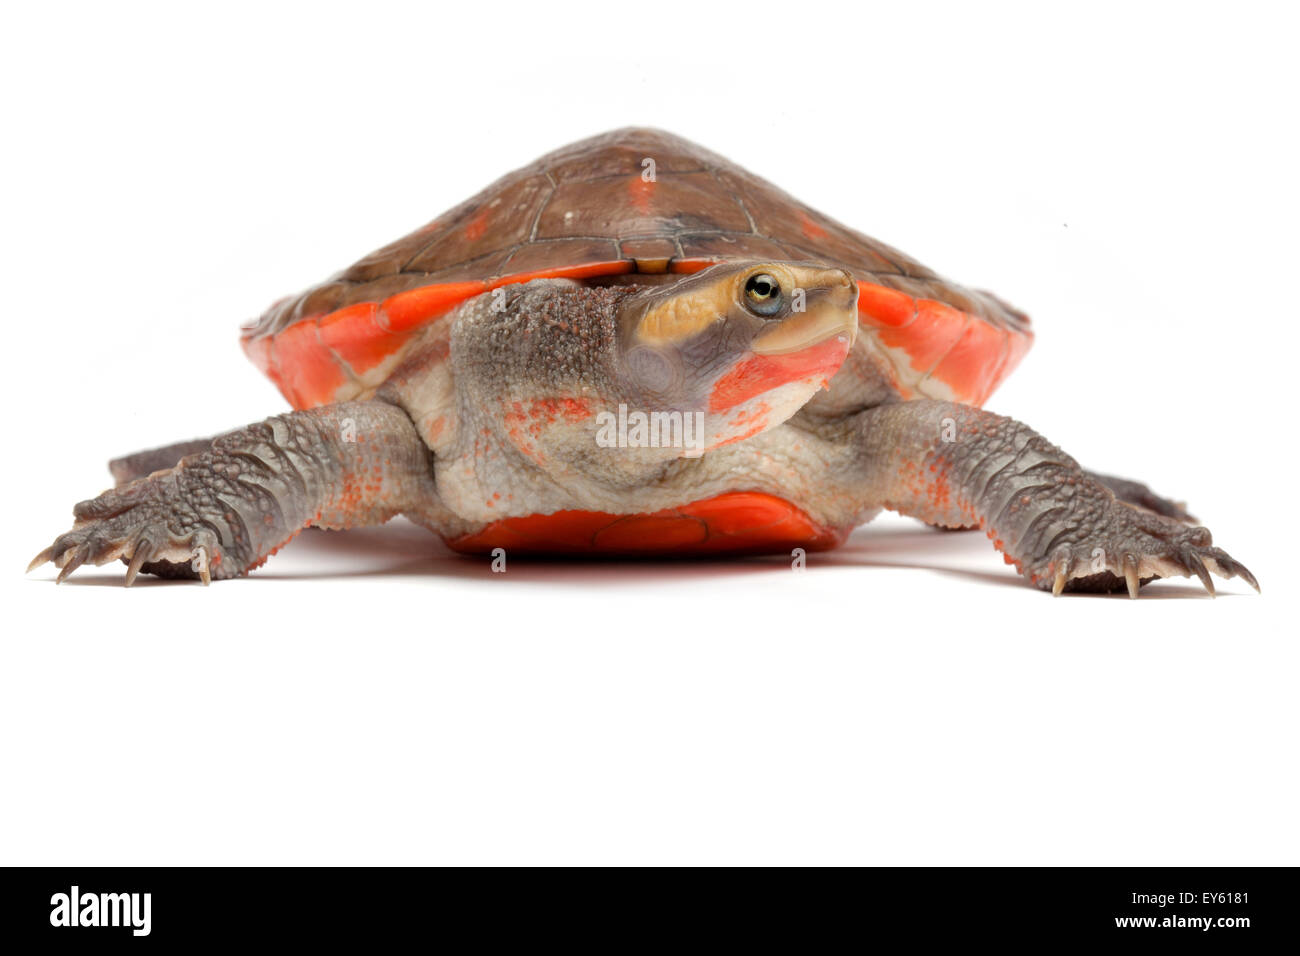 Red-bellied Short-necked Turtle on white background Stock Photo